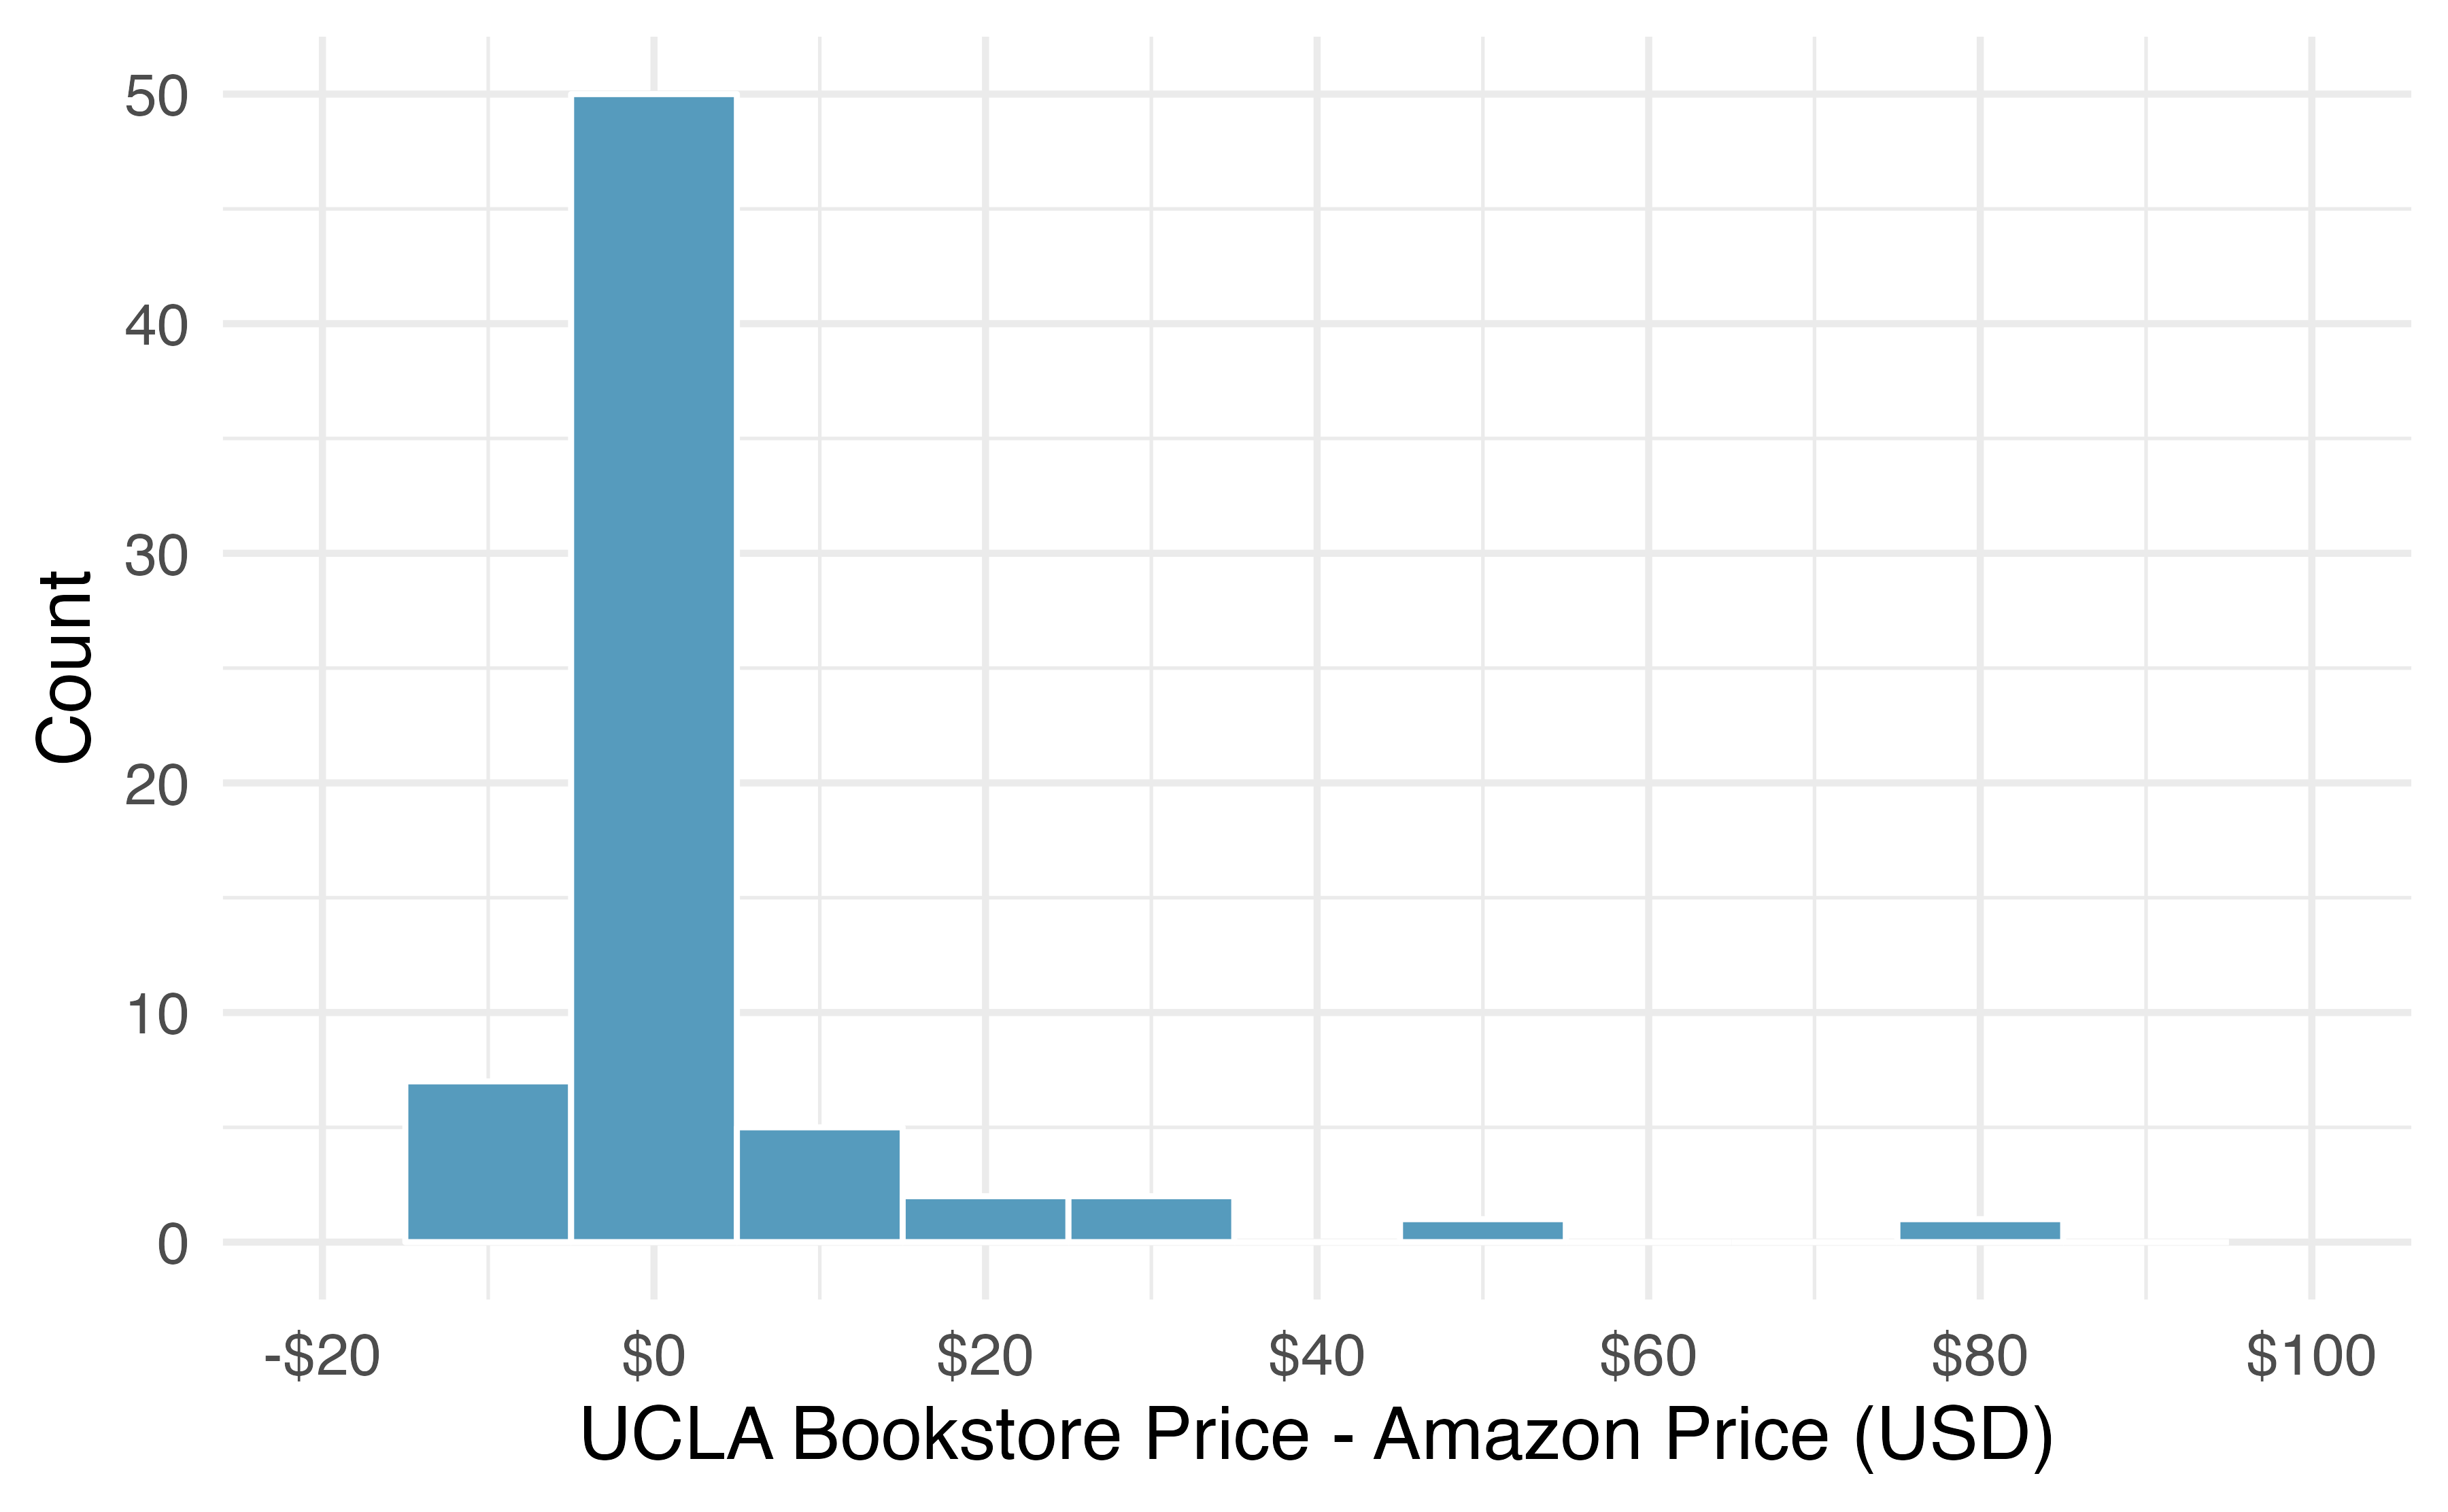 Histogram of the difference in price for each book samples, UCLA minus Amazon. The prices range from -$10 to $80 with a strong right skew.